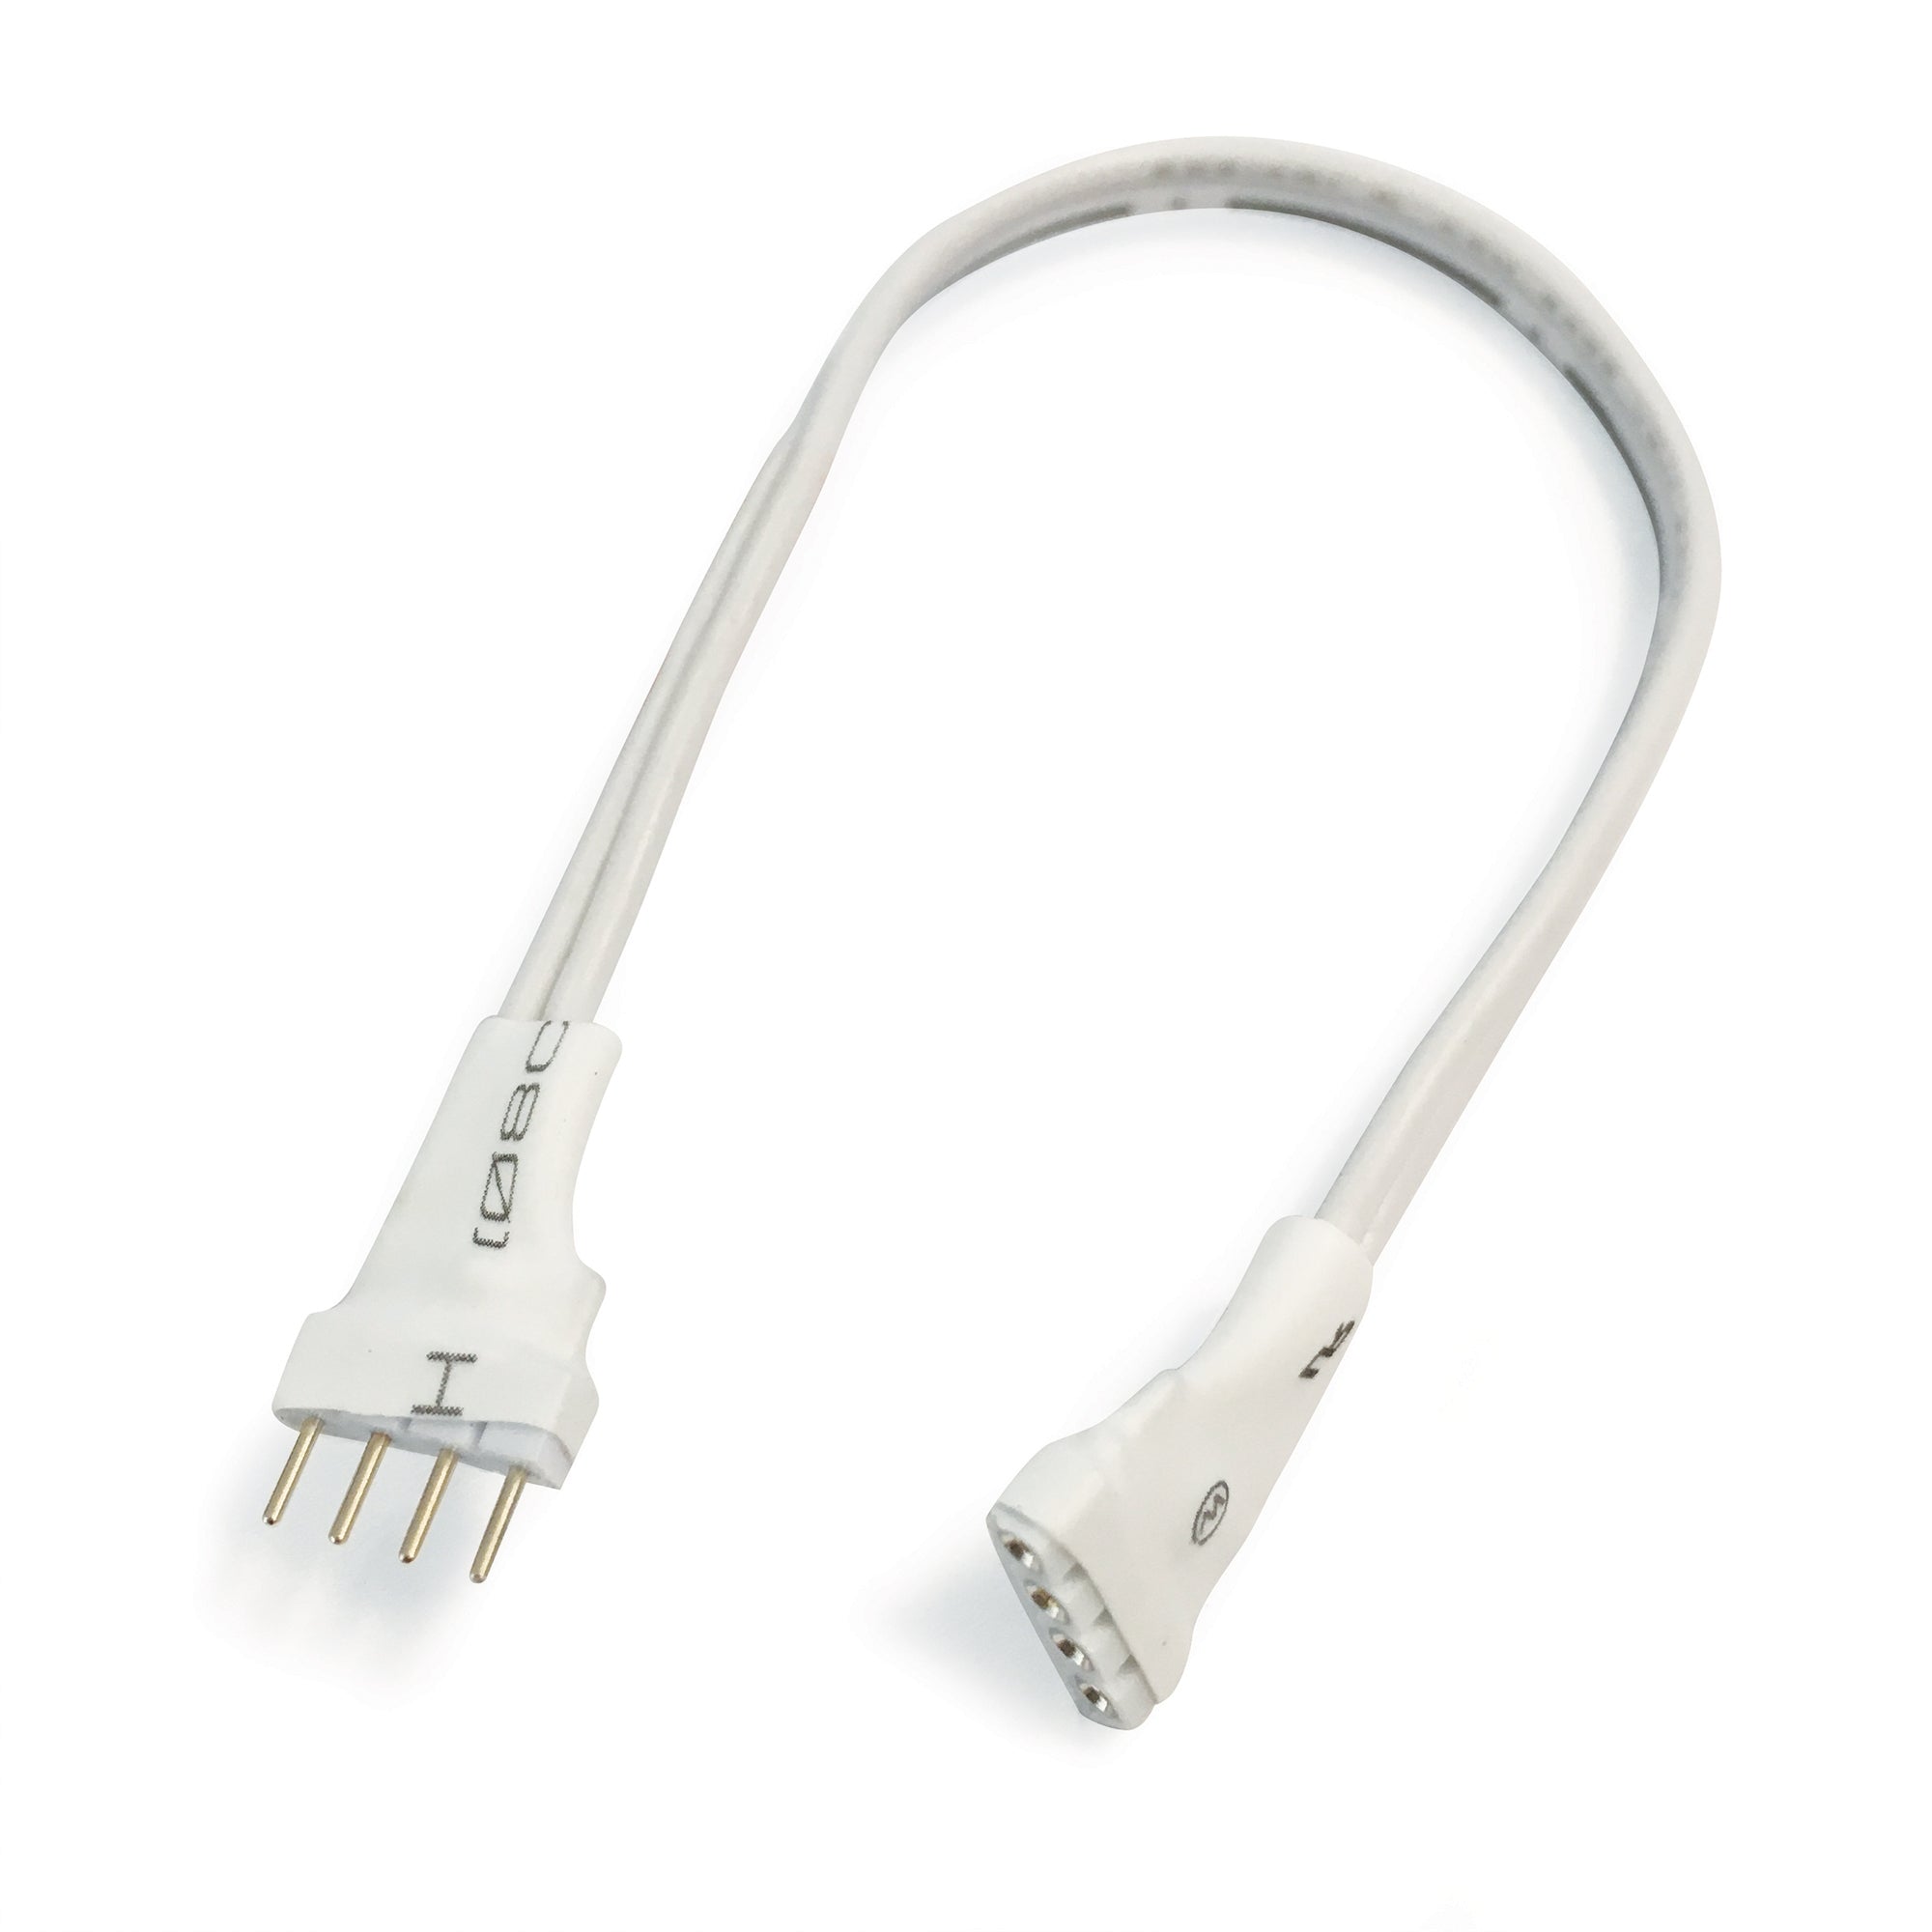 Nora Lighting NARGB-708W - Accent / Undercabinet - 8 Inch Interconnection Cable for 12V or 24V RGB & CCT Tape Light